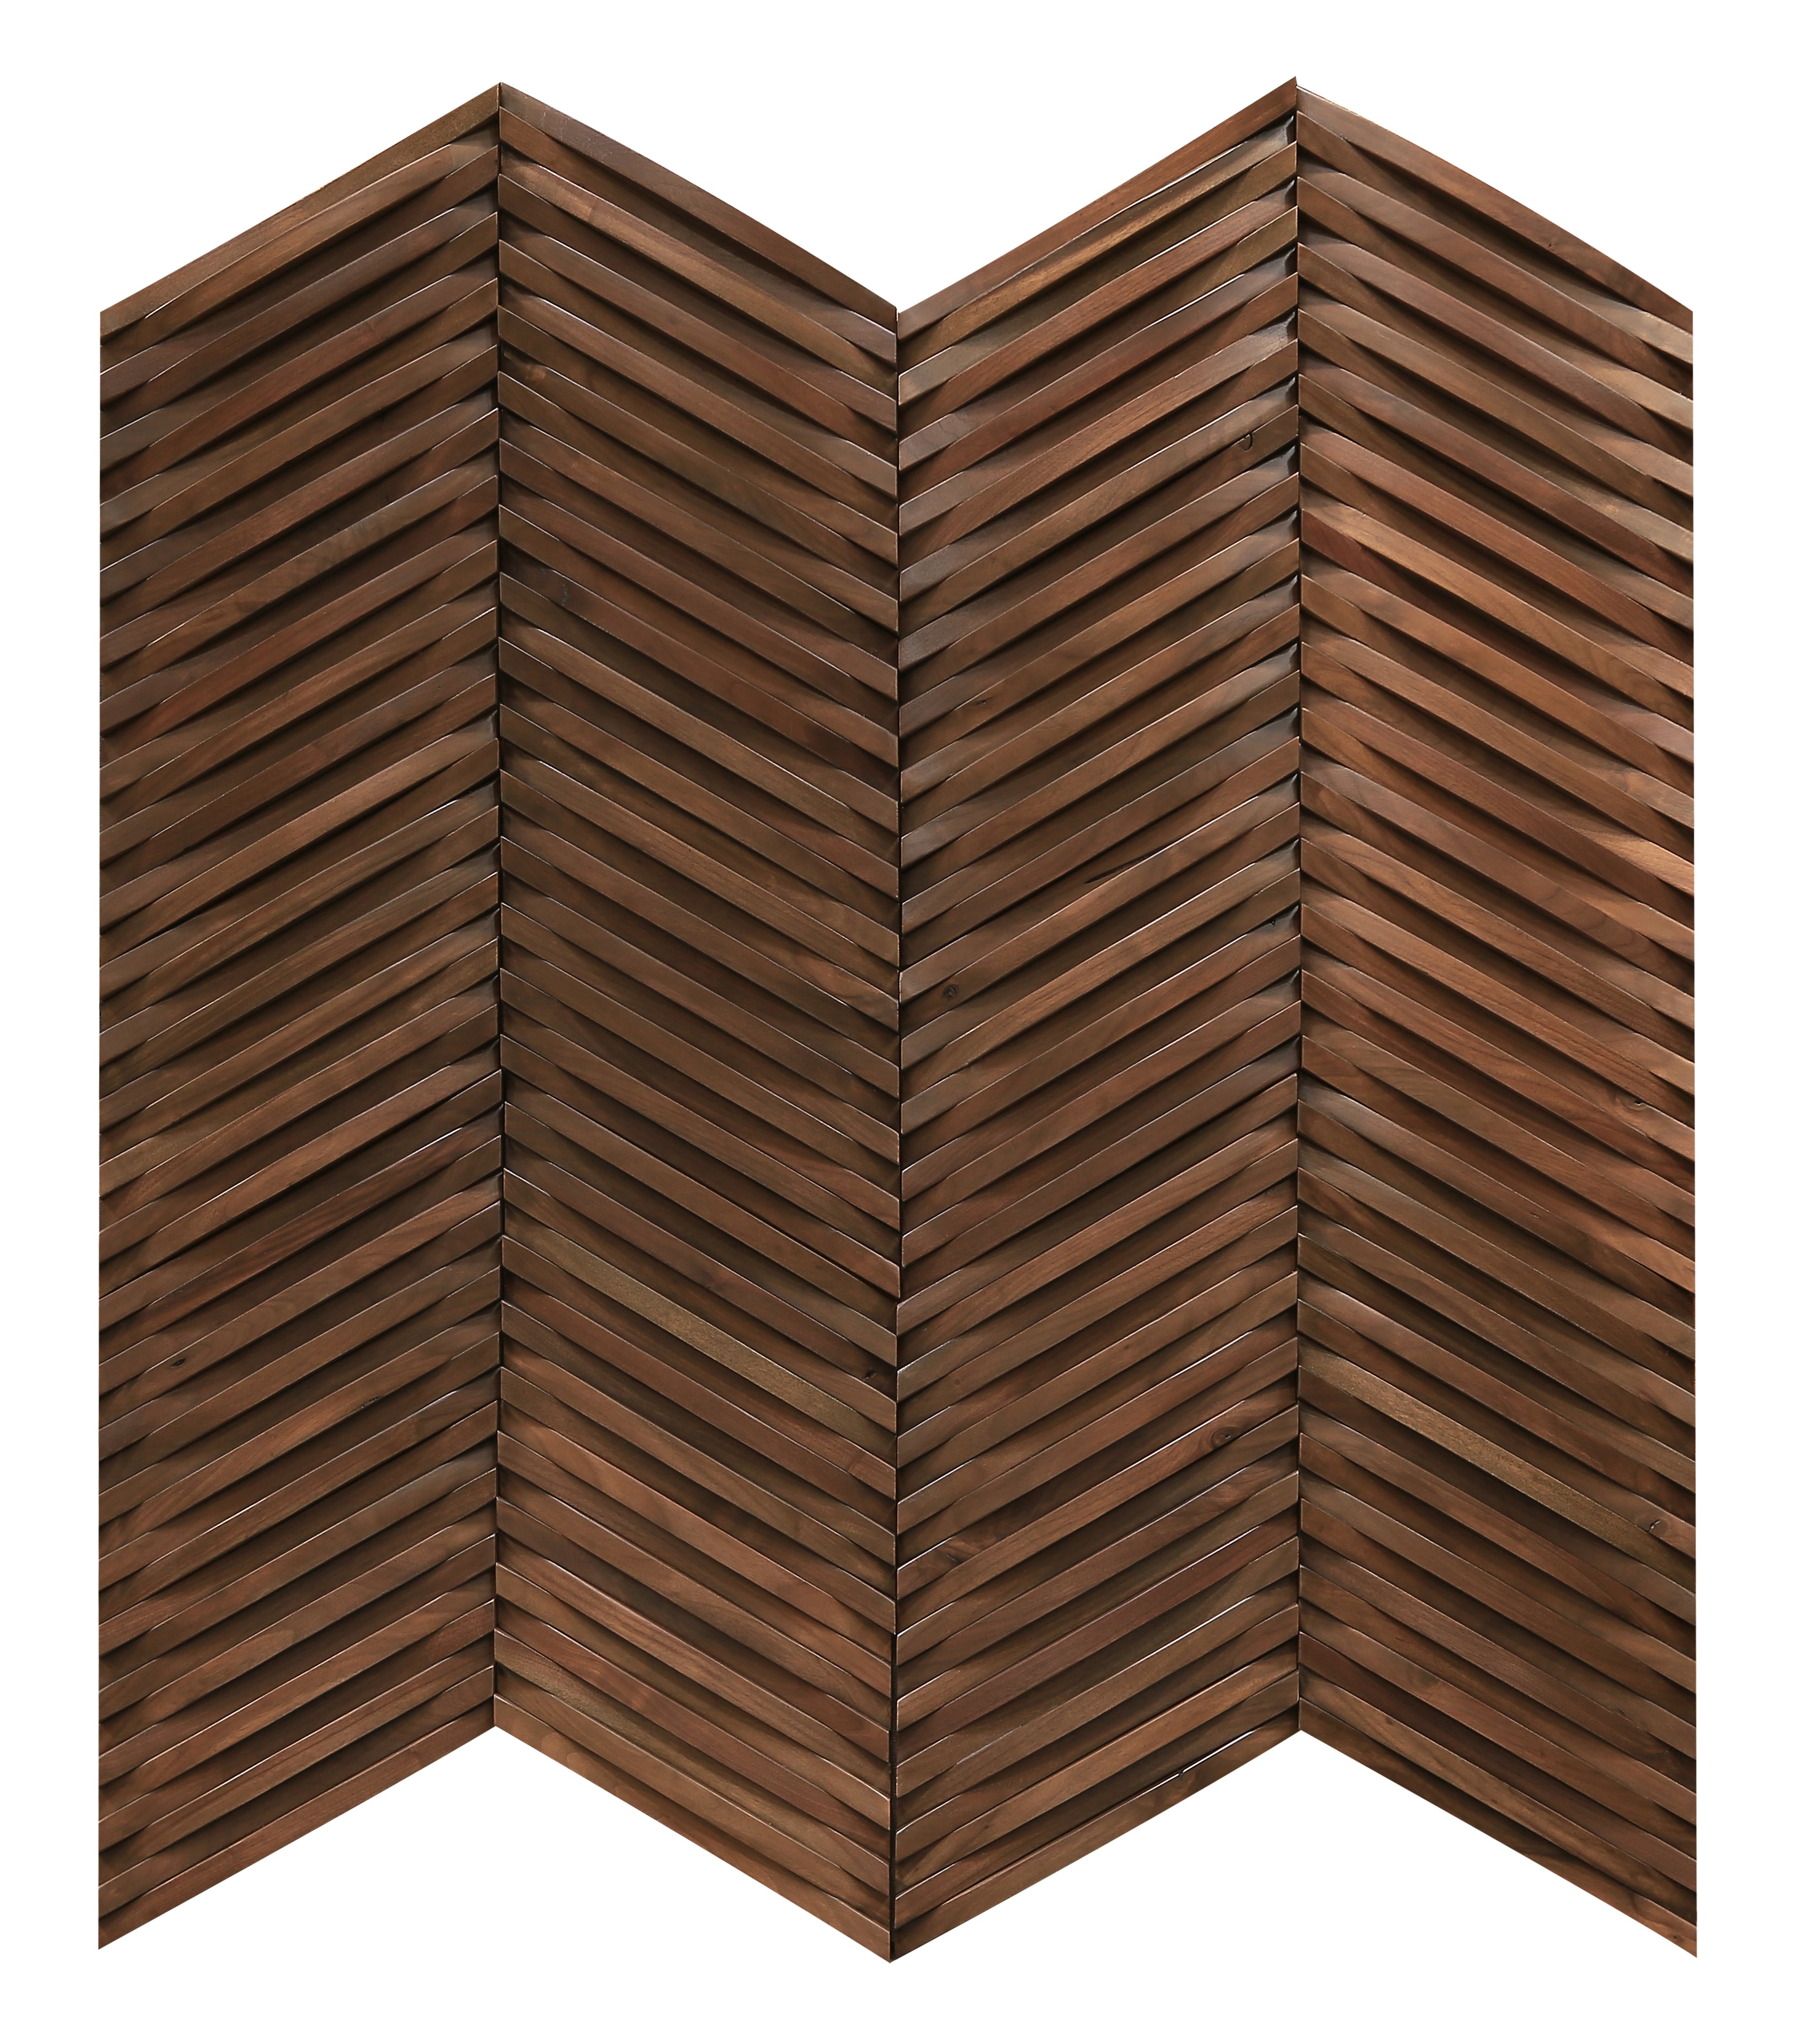 duchateau inceptiv curva chevron stout walnut three dimensional wall natural wood panel conversion varnish for interior use distributed by surface group international